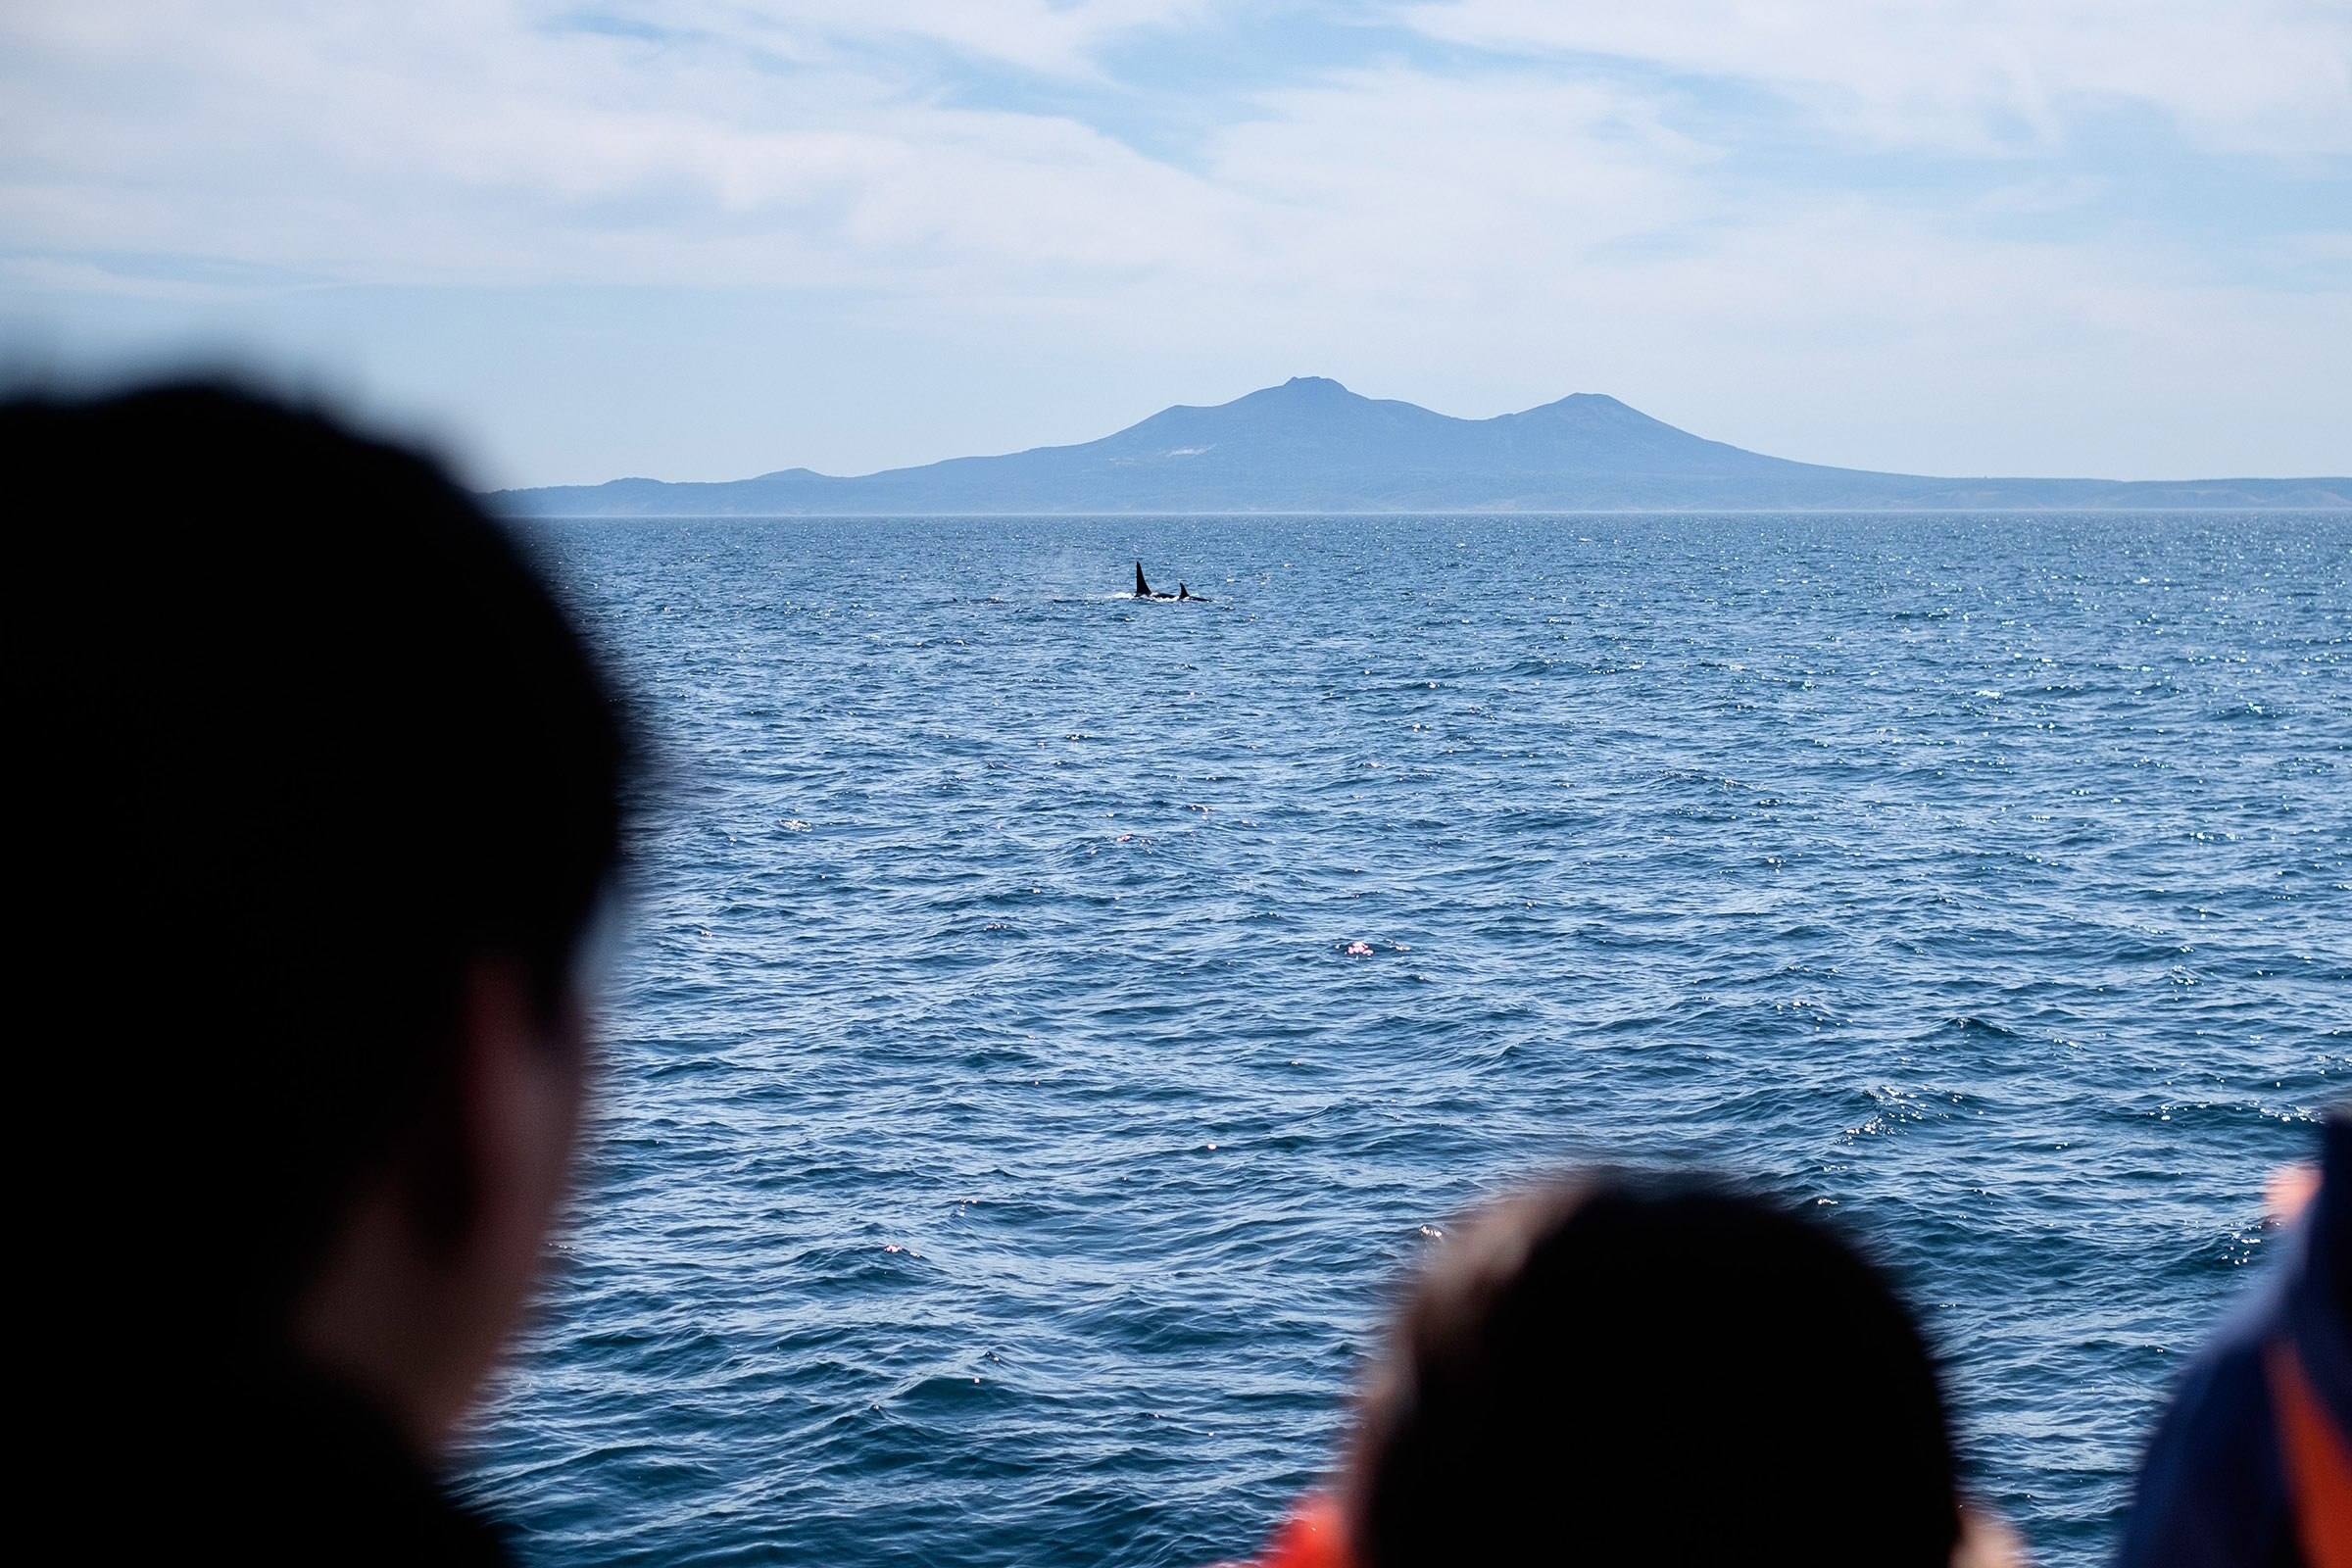 A pod of Orca pierce the surface of the sea while whale watchers look on. In the background a mountain dominates the horizon.